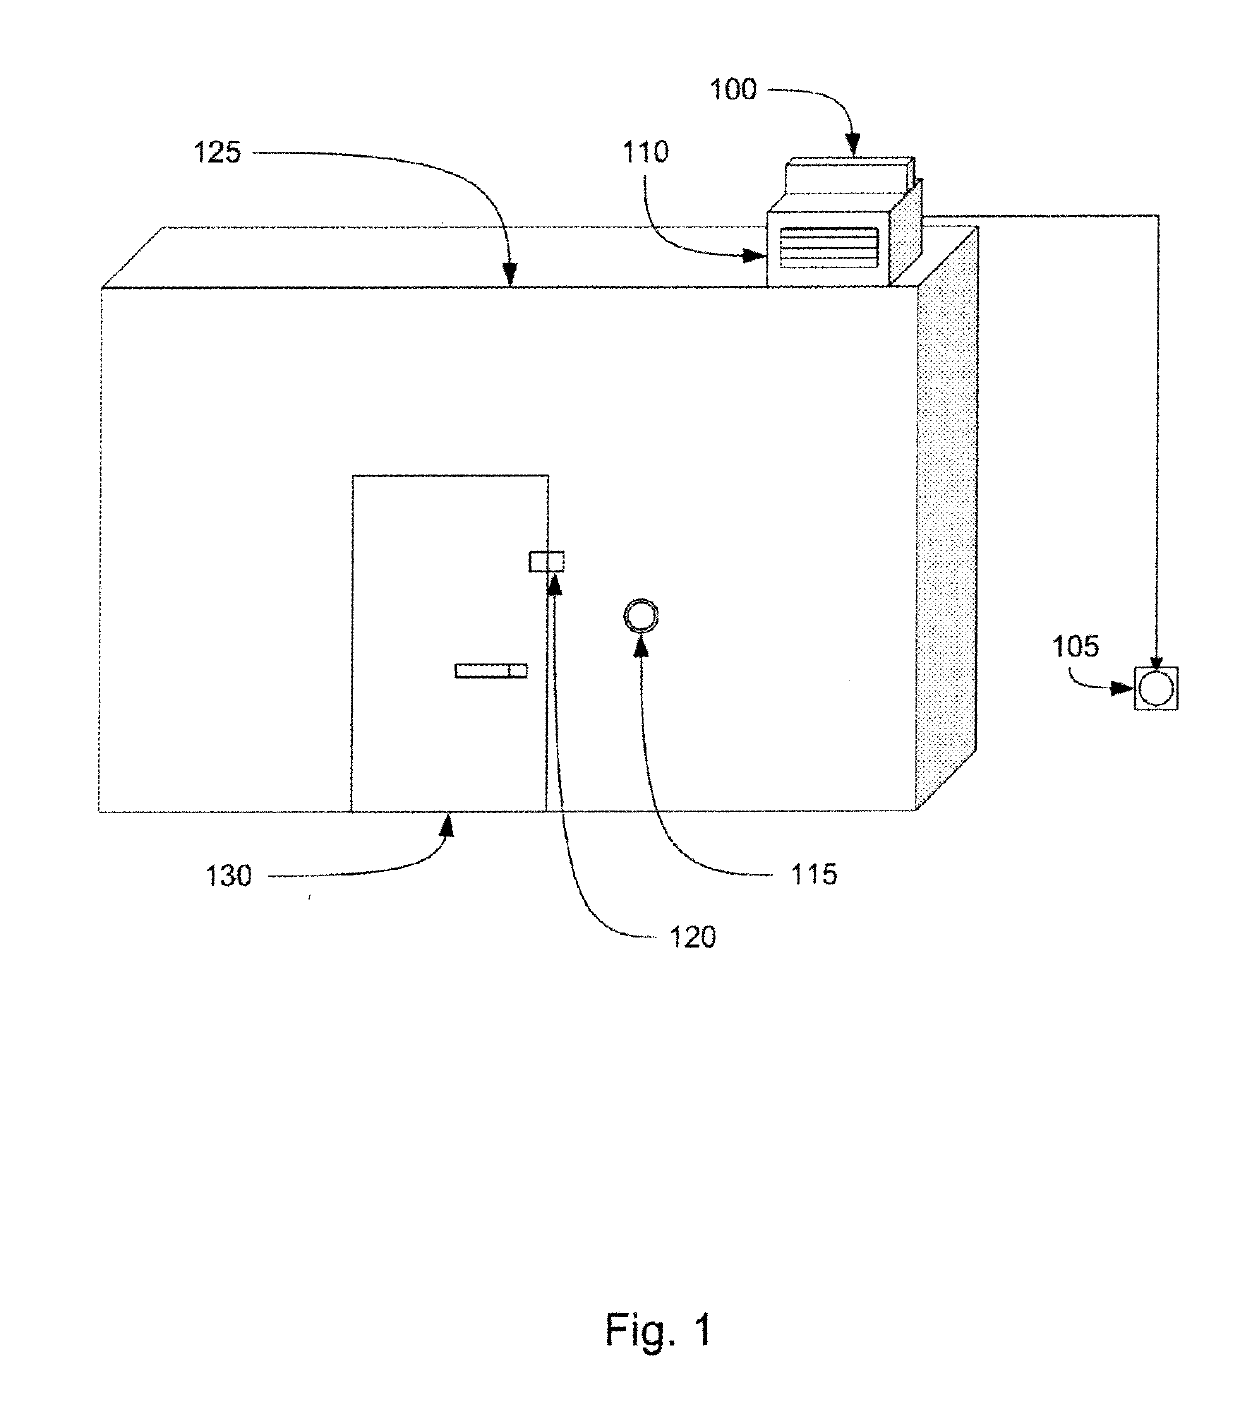 Methods and Apparatus for Predictive Failure Analysis of a Cooling Device